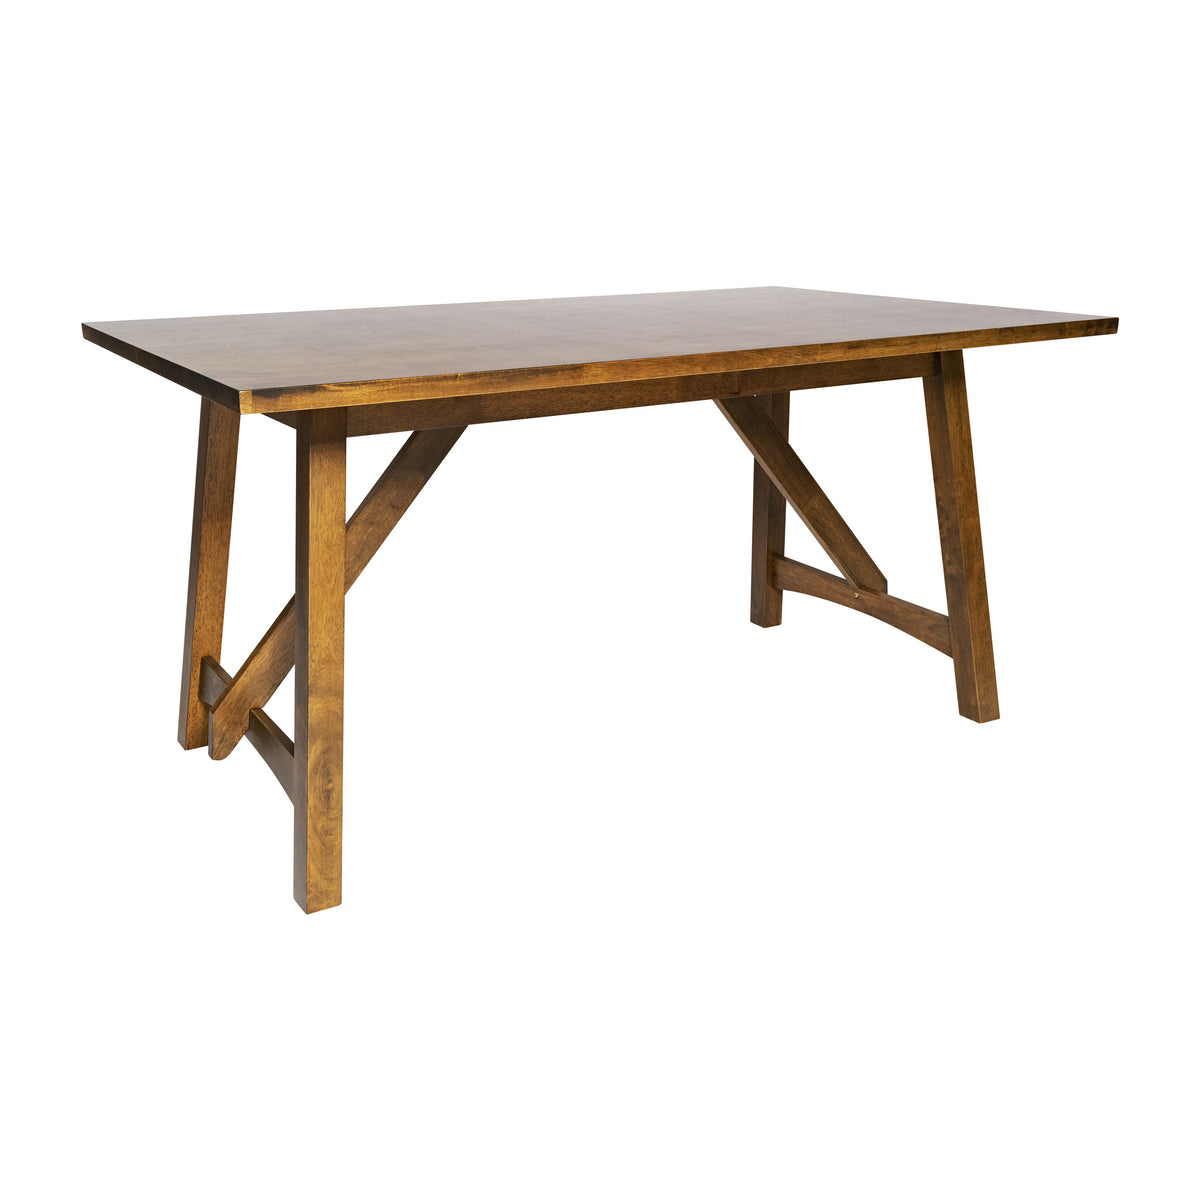 Light Cappuccino |#| Solid Wood 60inch Commercial Grade Trestle Base Dining Table in Antique Gray